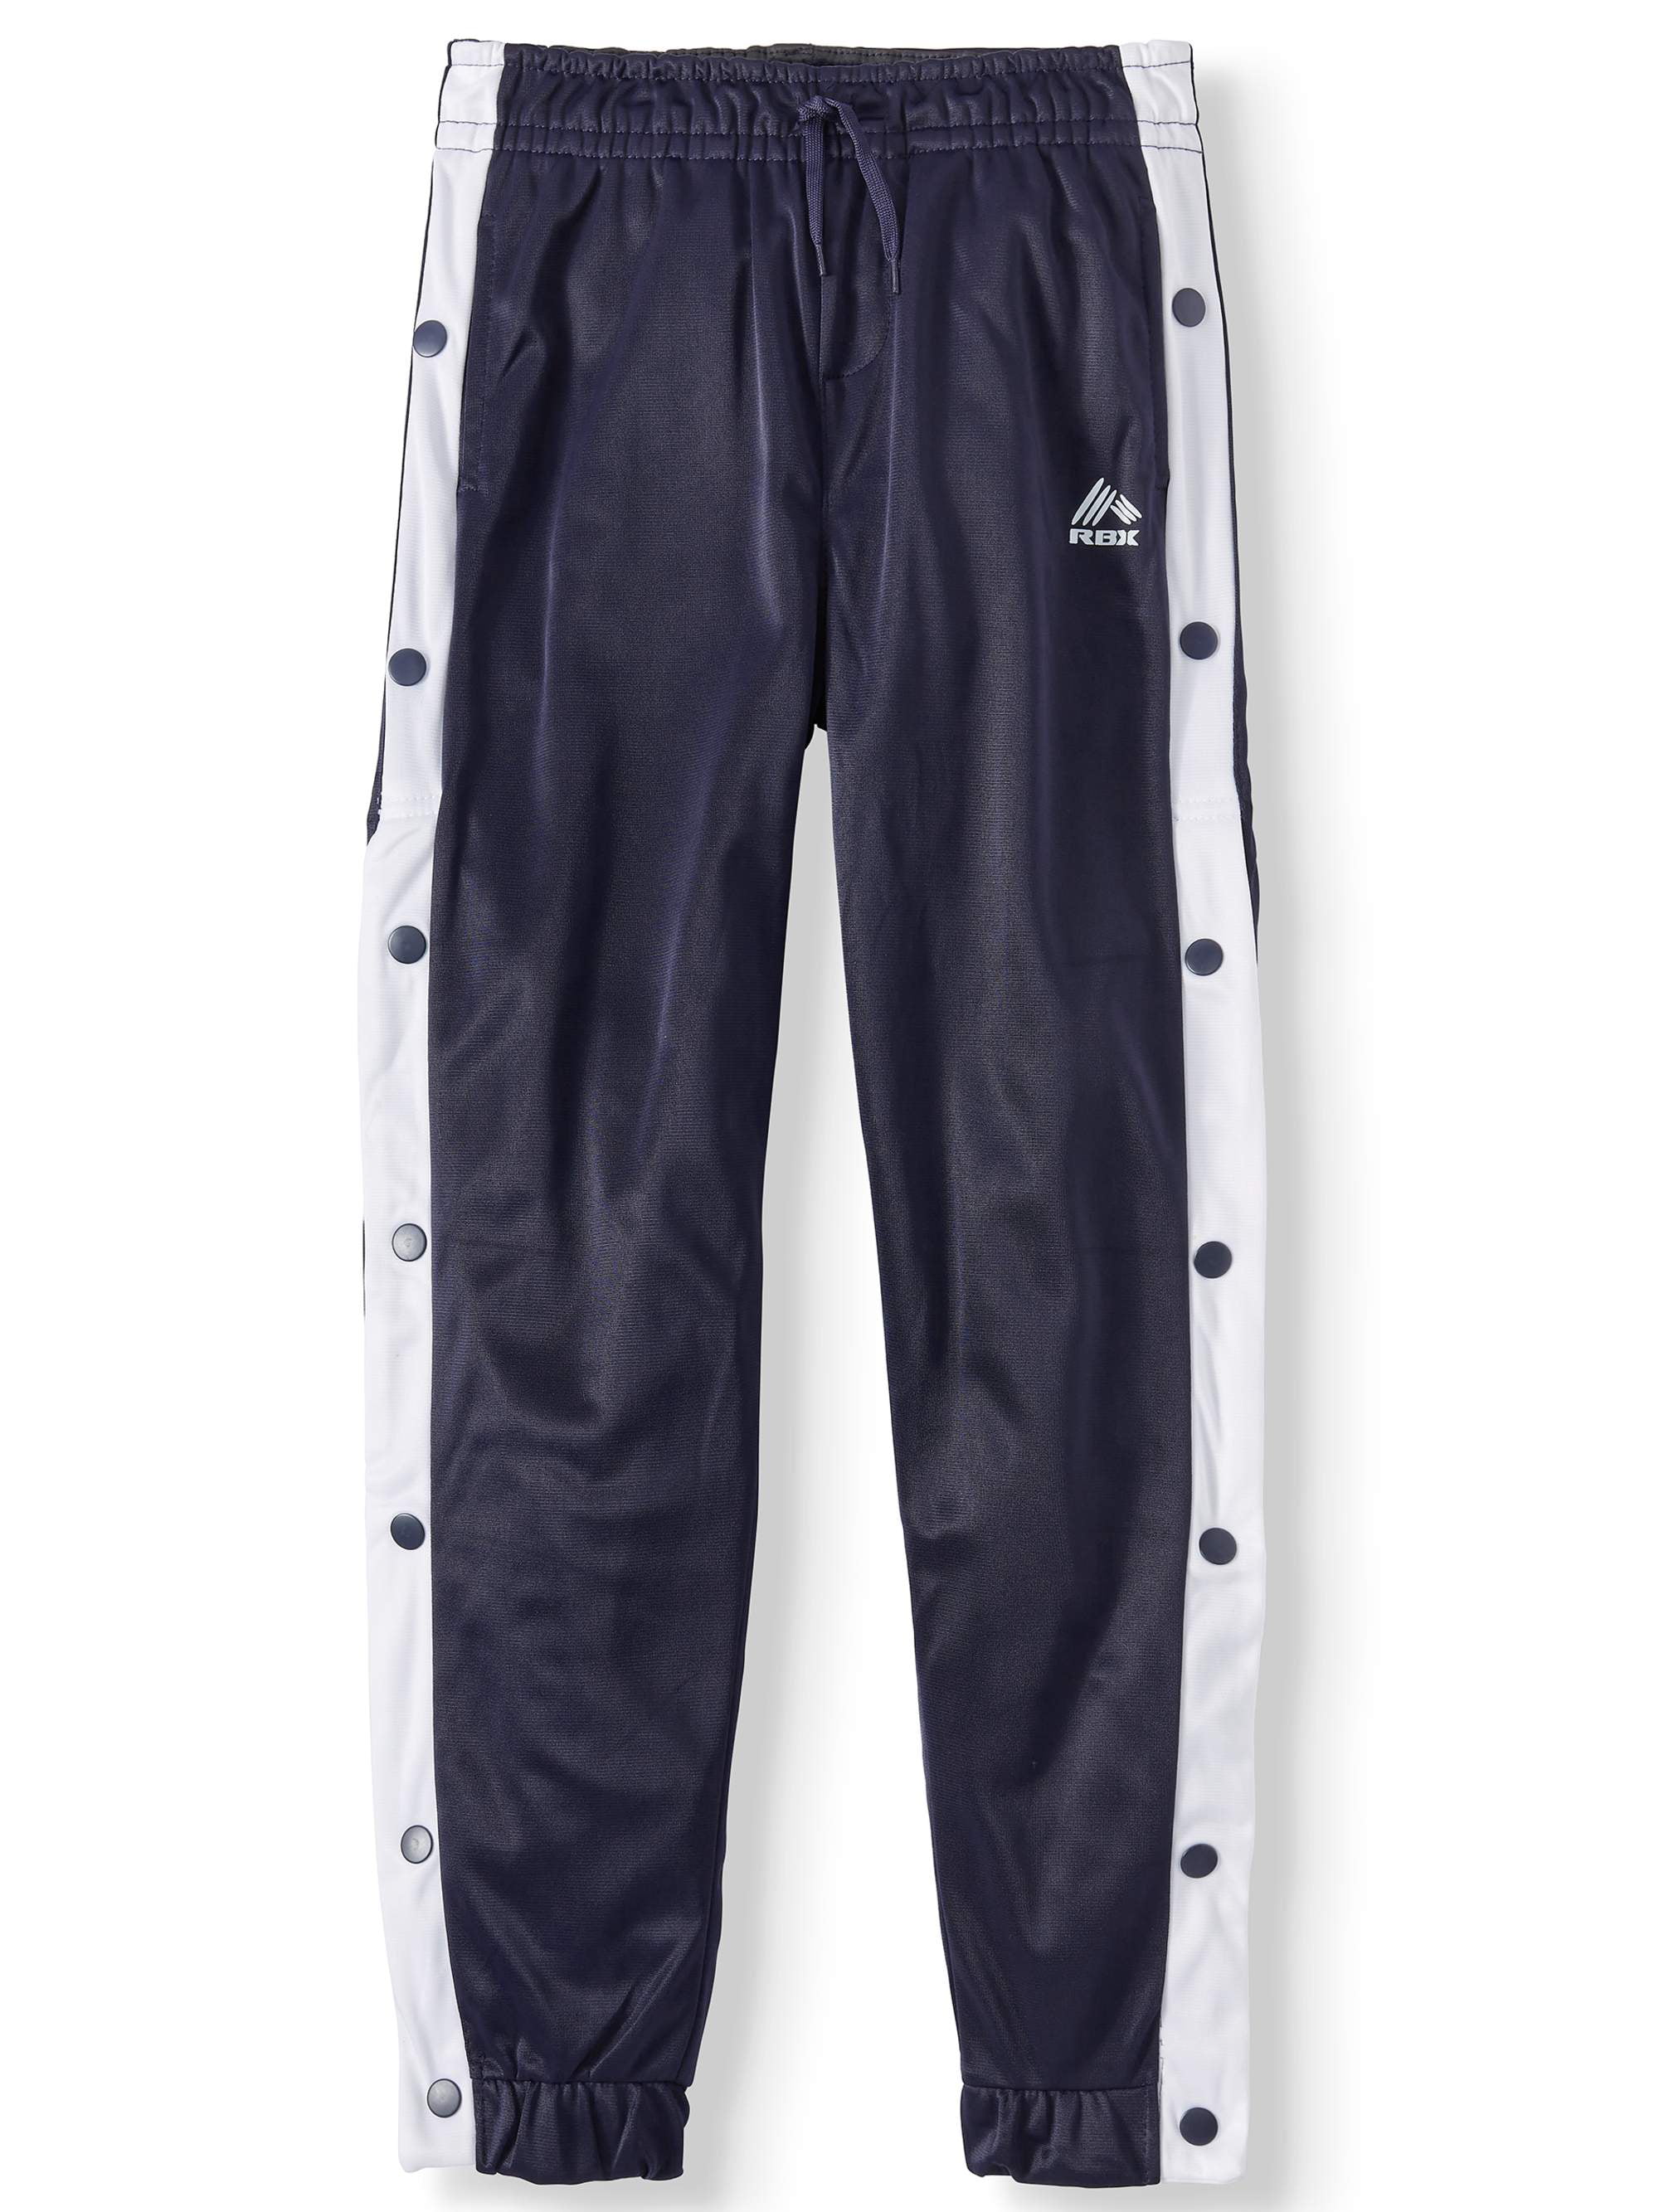 Rbx Boys 2 Pack Tricot Jogger - multiple games rbx